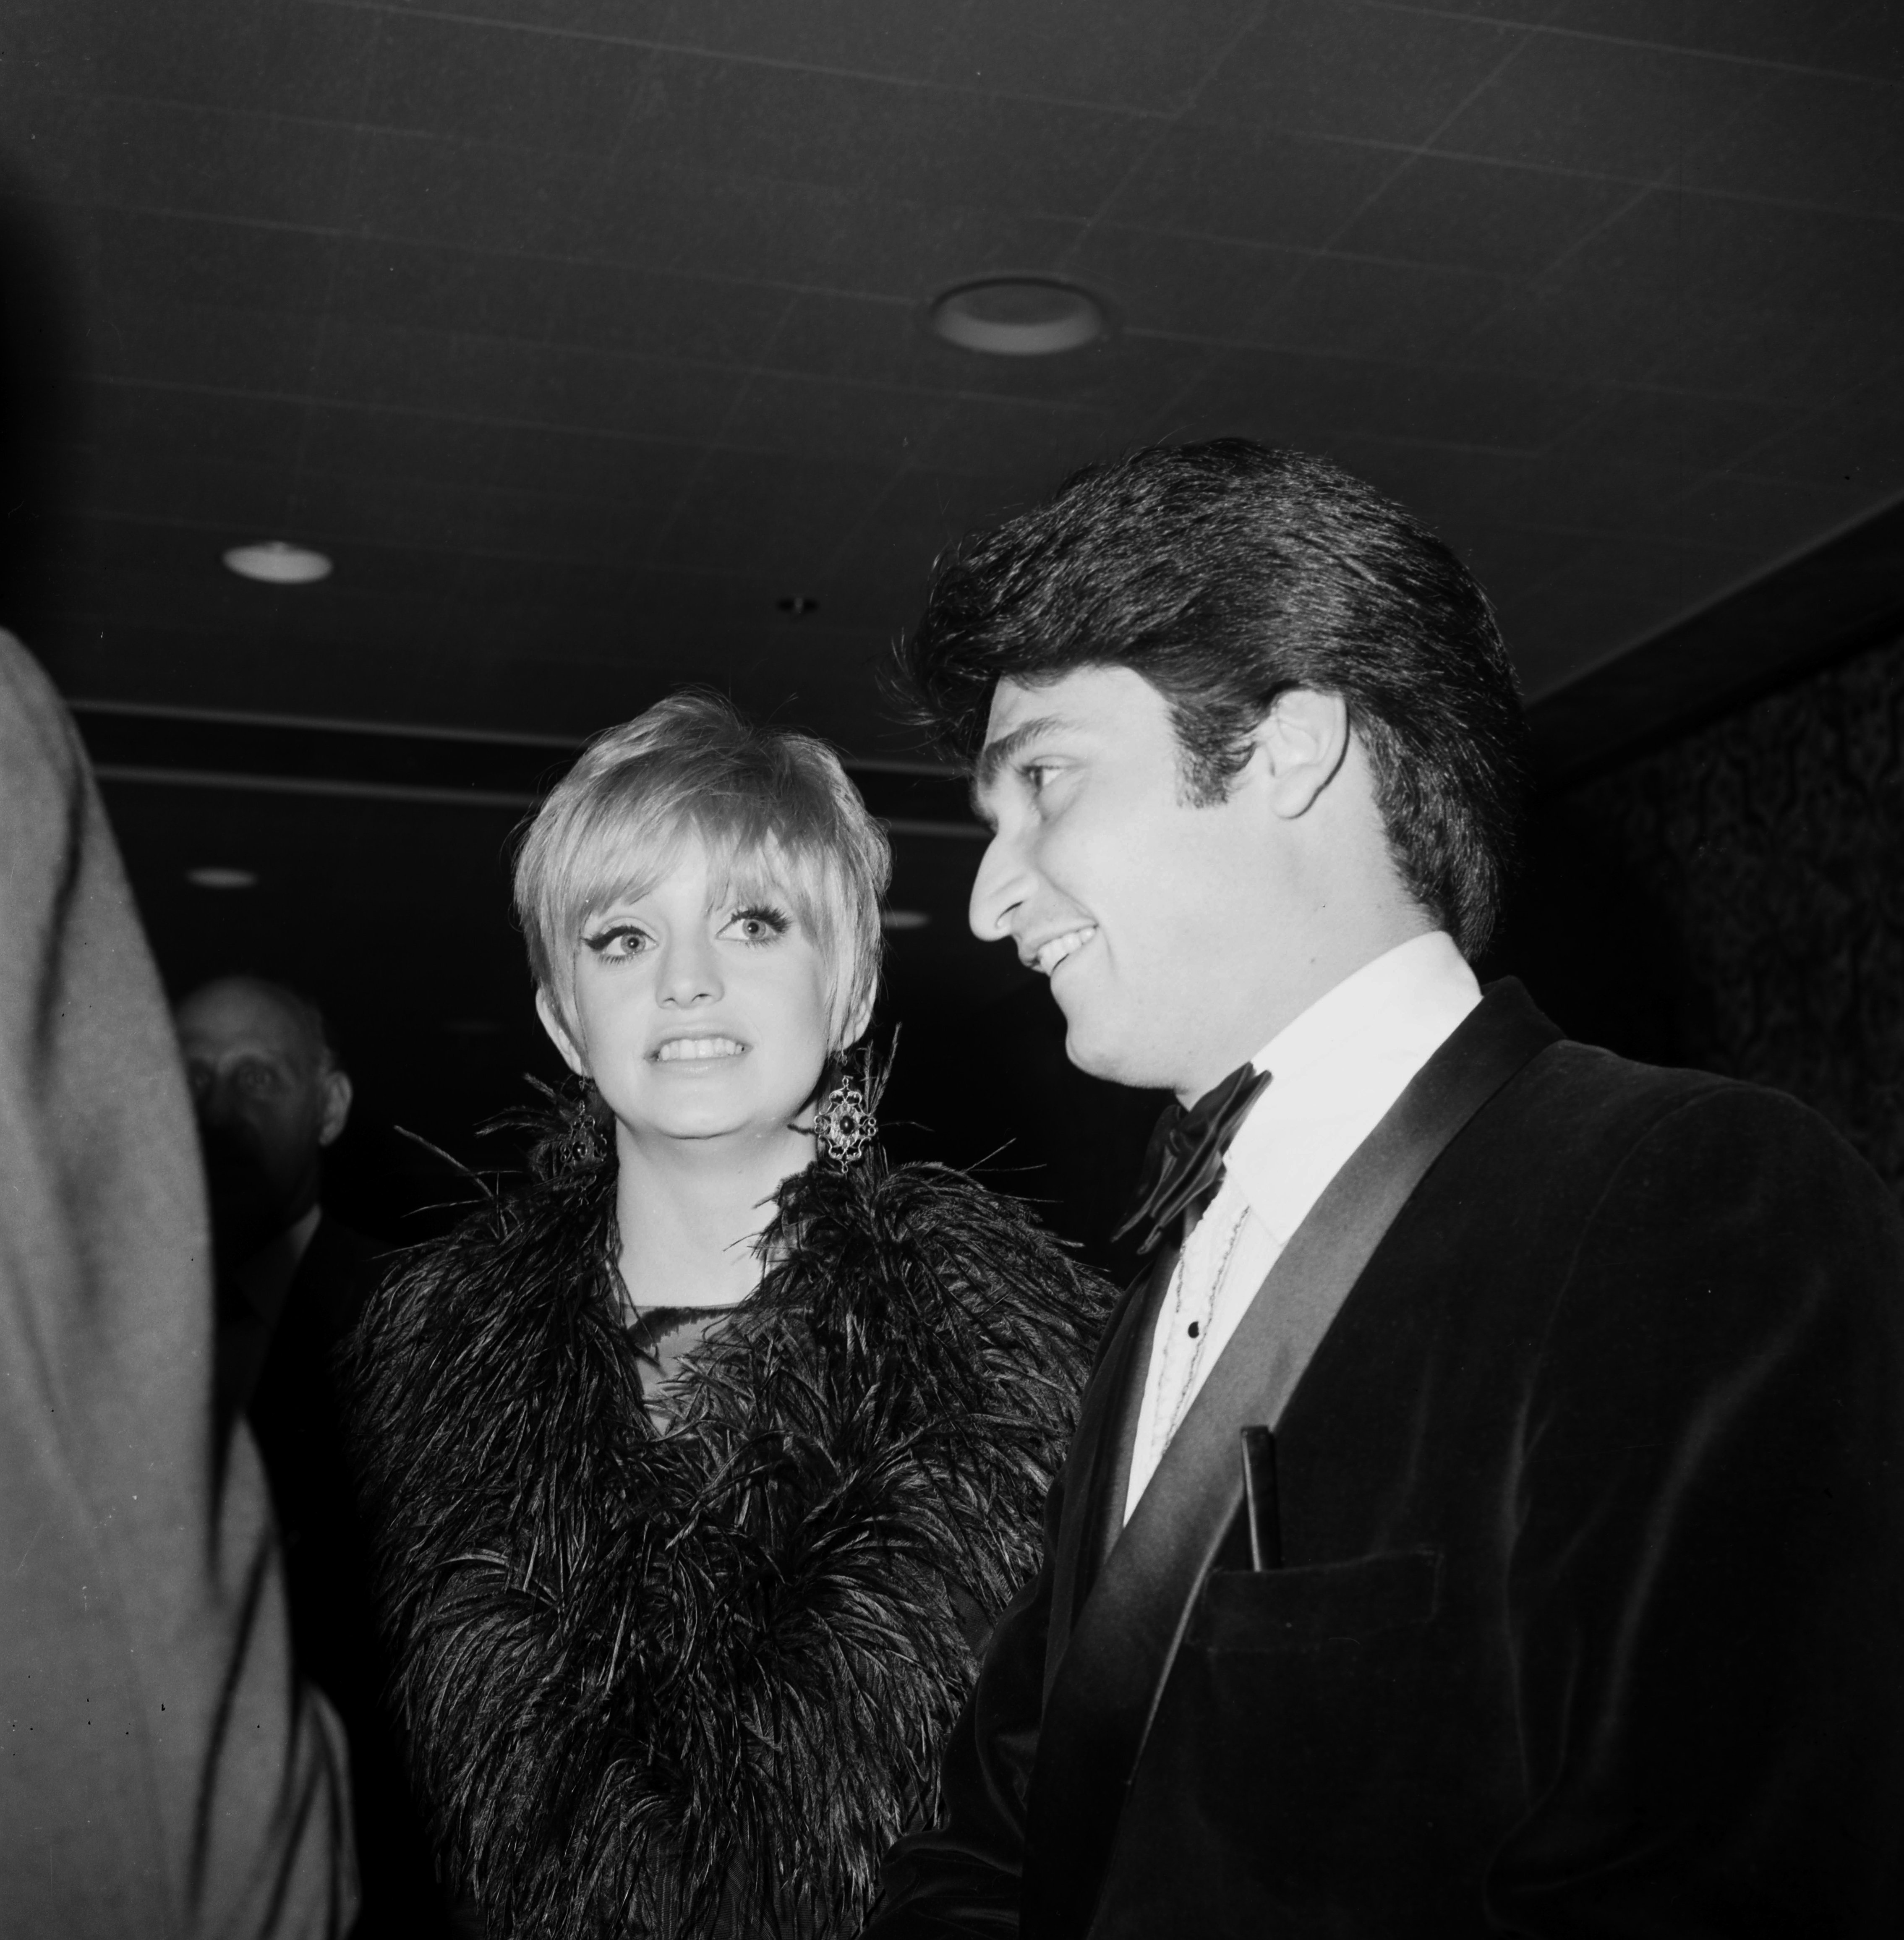 Actress Goldie Hawn with Gus Trikonis attends a party in Los Angeles, California. Circa 1966 | Source: Getty Images 